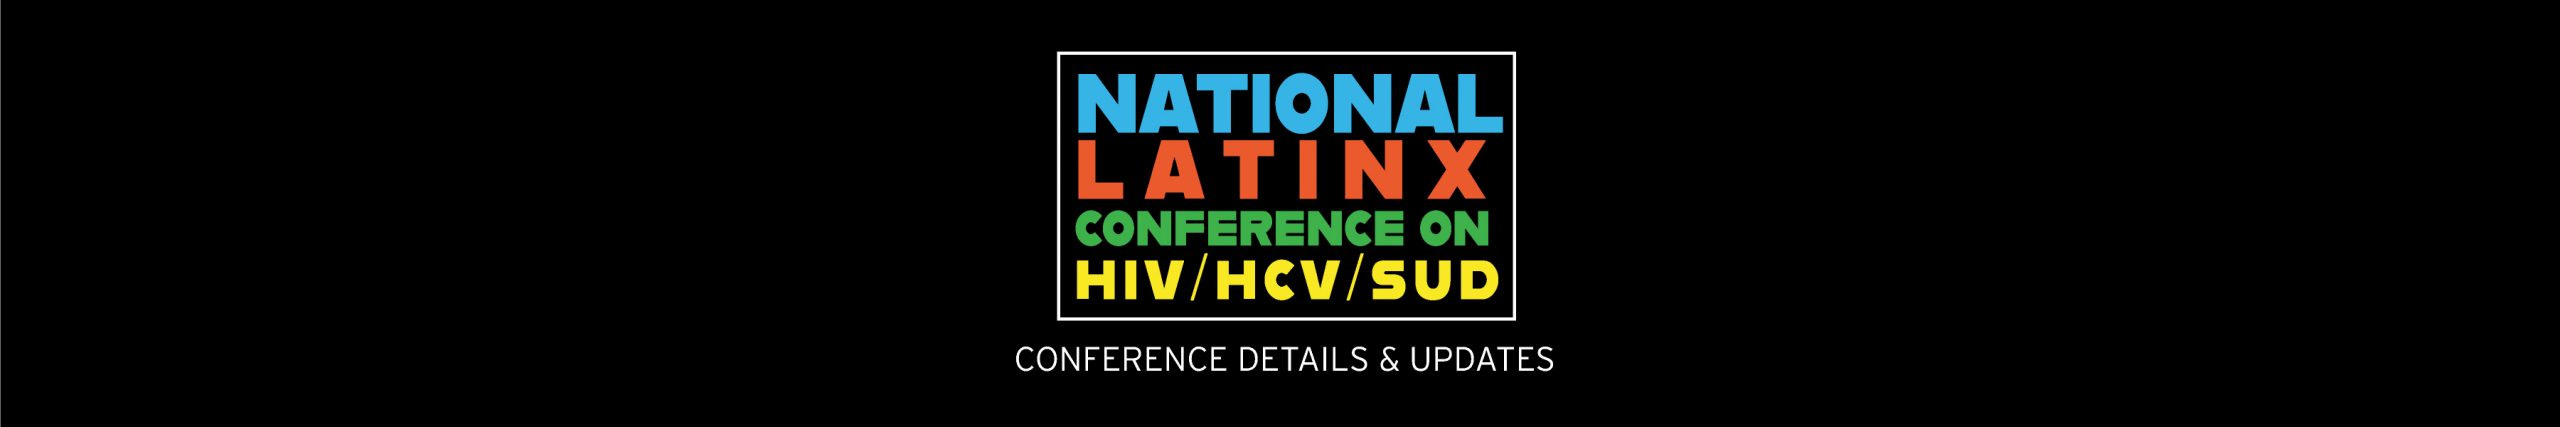 National Latinx Conference on HIV/HCV/SUD Cancelled for 2020